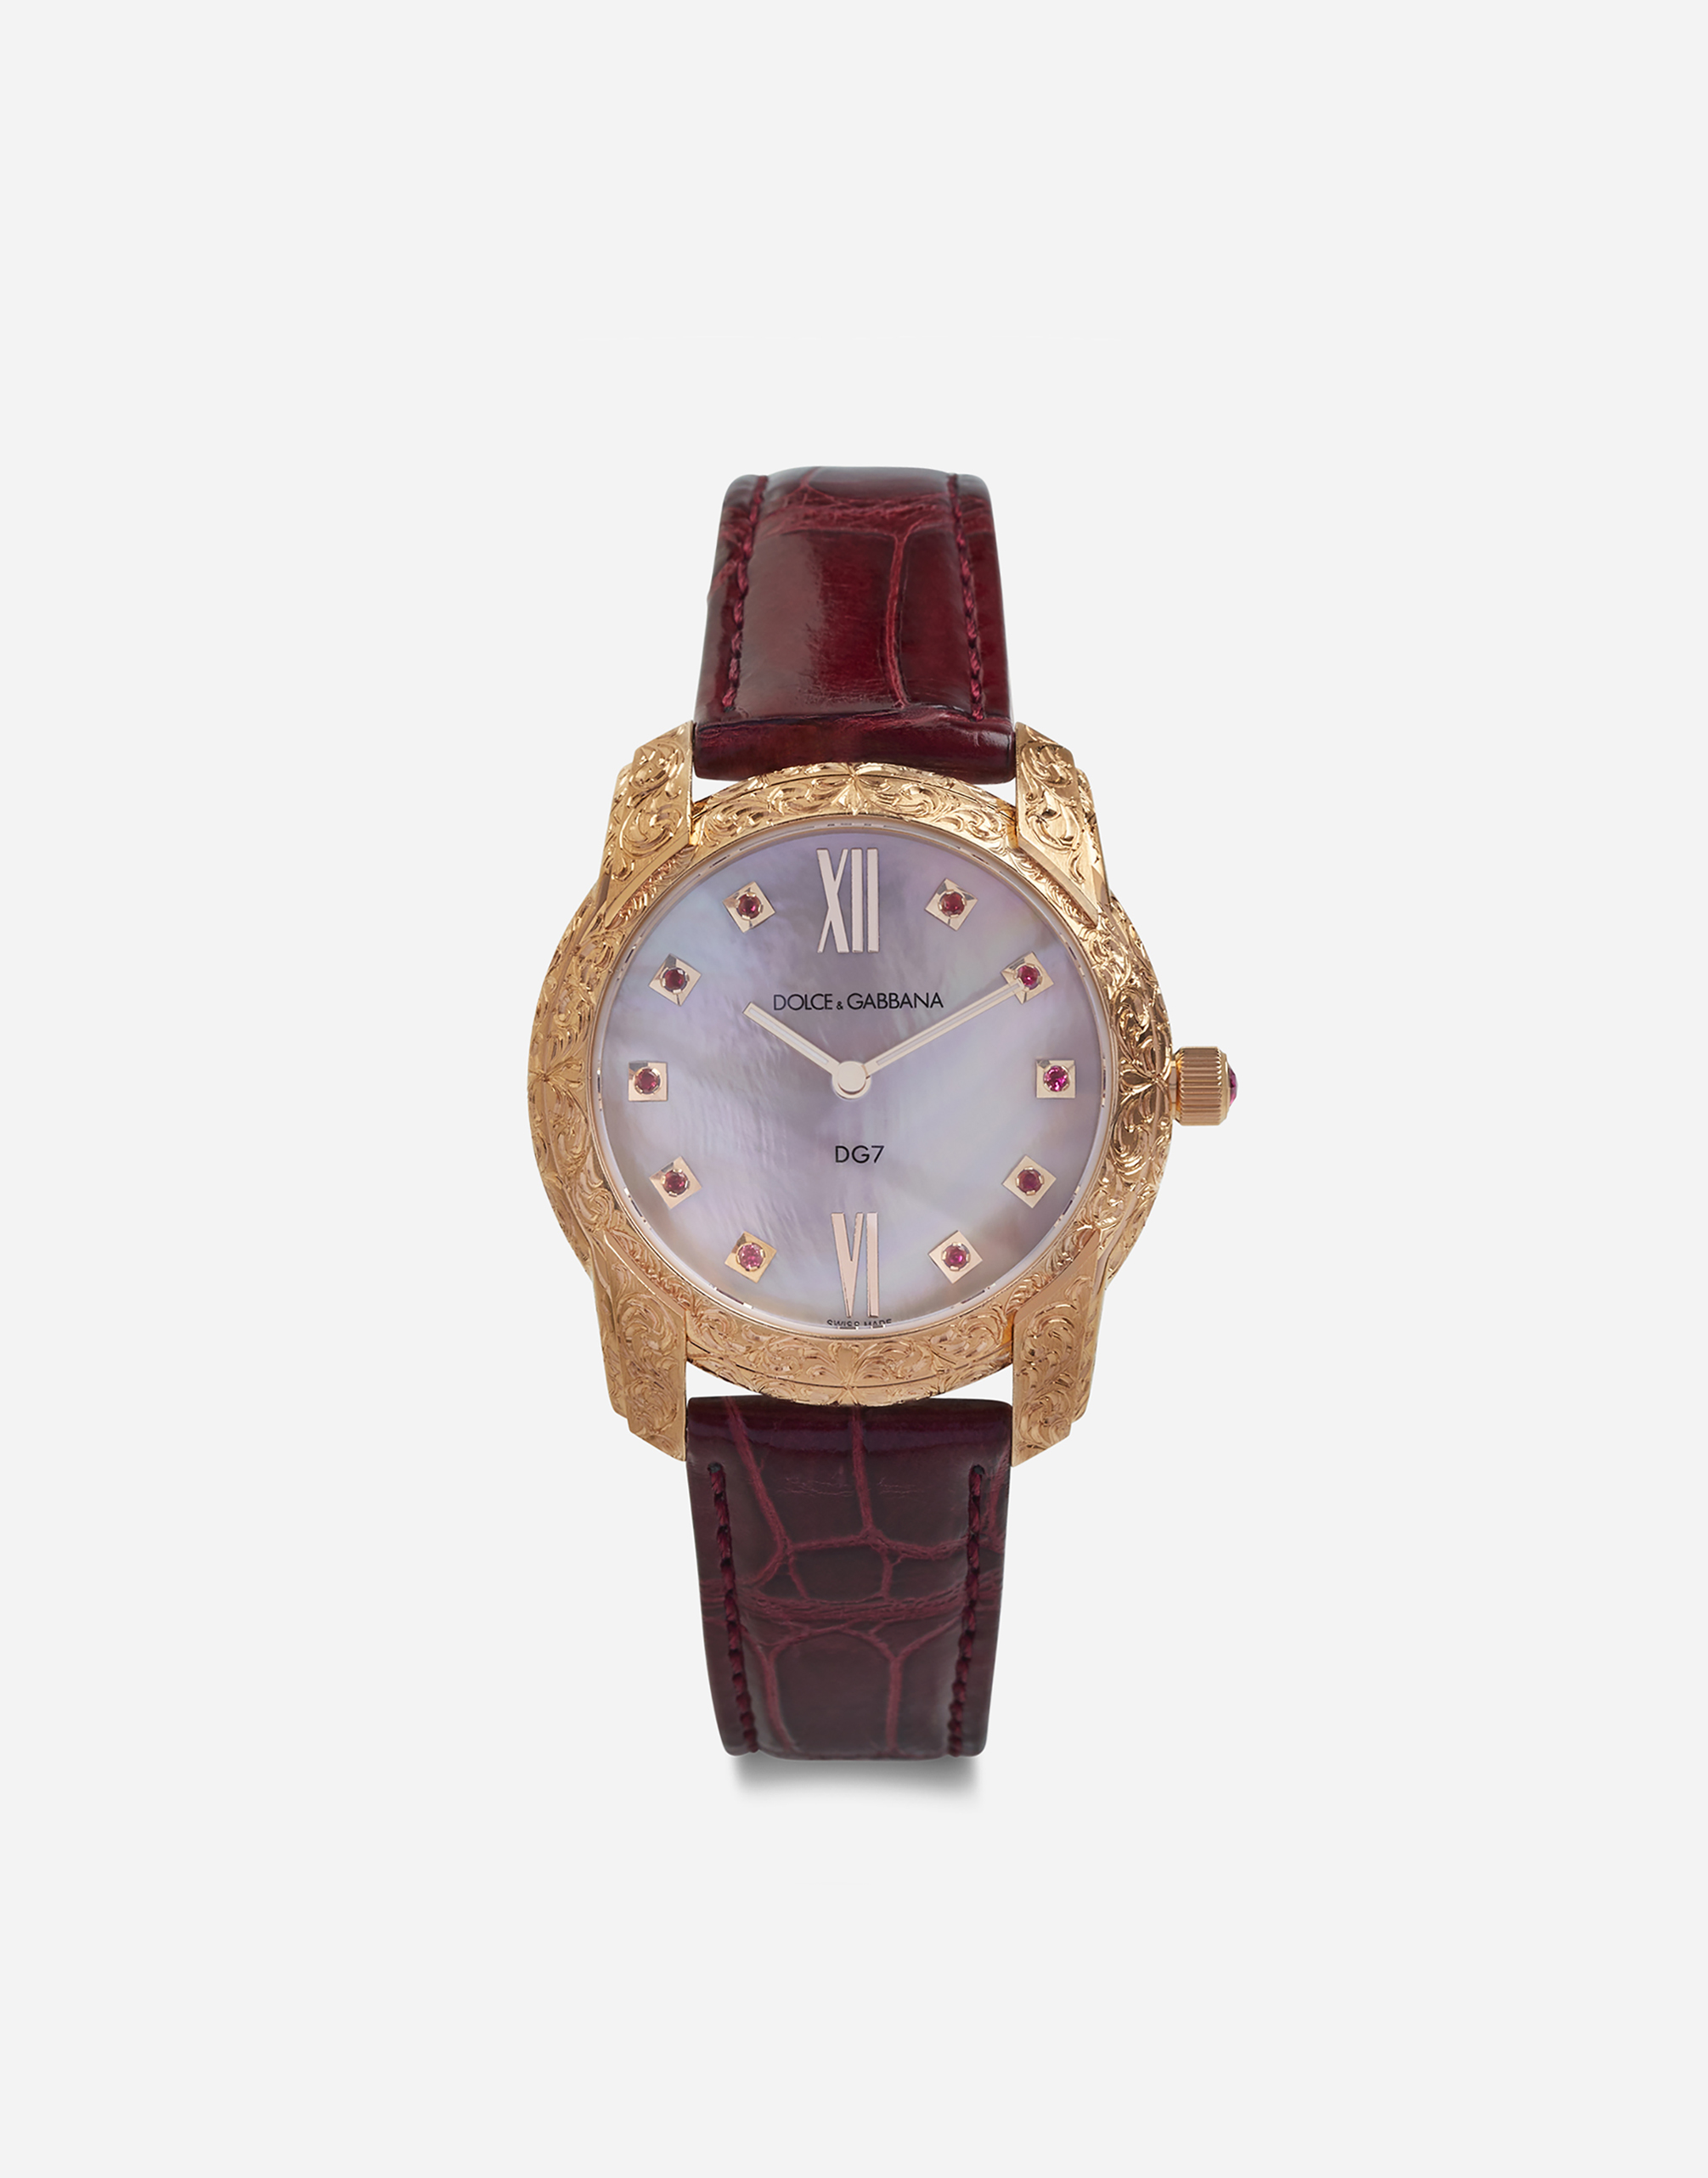 Dolce & Gabbana Dg7 Gattopardo Watch In Red Gold With Pink Mother Of Pearl And Rubies In Burgundy